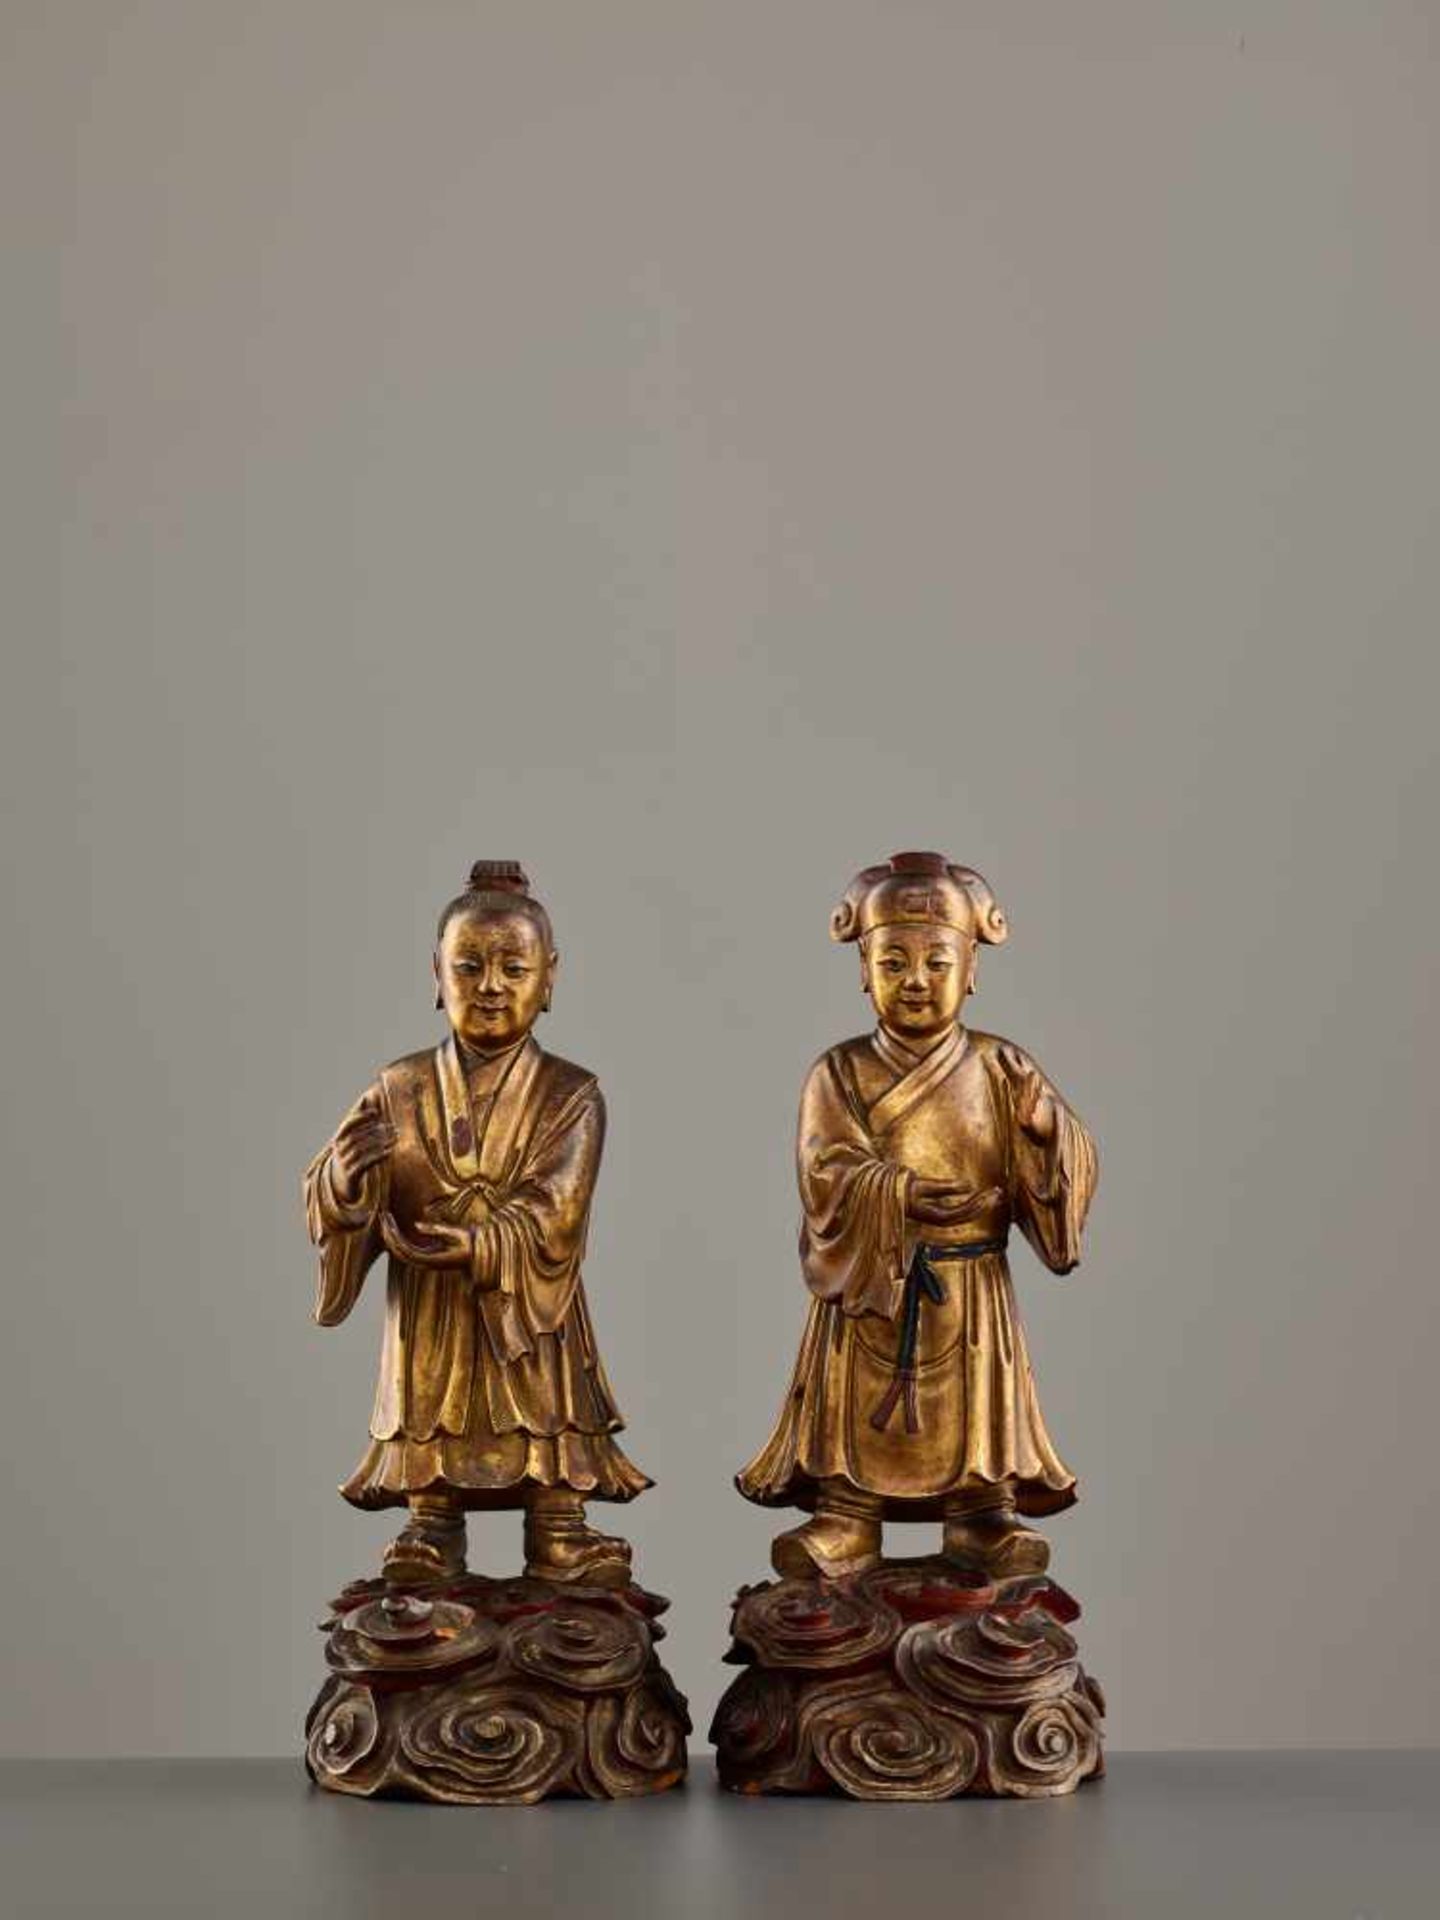 A PAIR OF WOOD AND LACQUER ‘TWIN IMMORTALS OF HARMONY’ FIGURES, 17th – 18th CENTURYEach carved